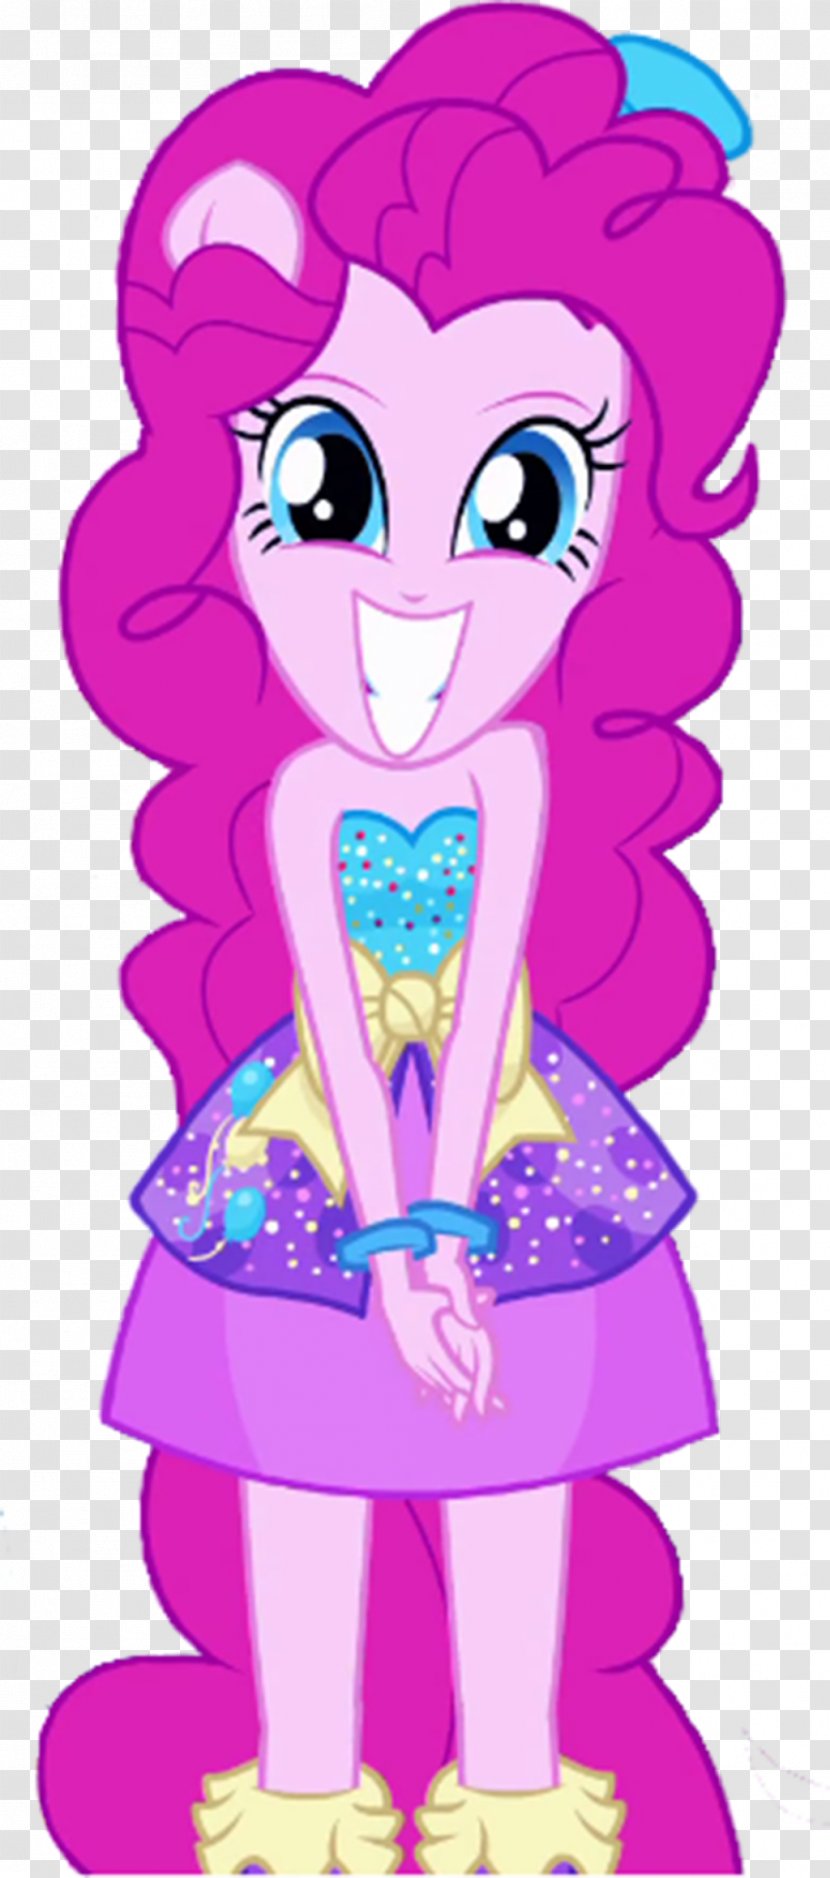 Pinkie Pie Rarity Fluttershy Female - Silhouette - Equestria Girls Transparent PNG